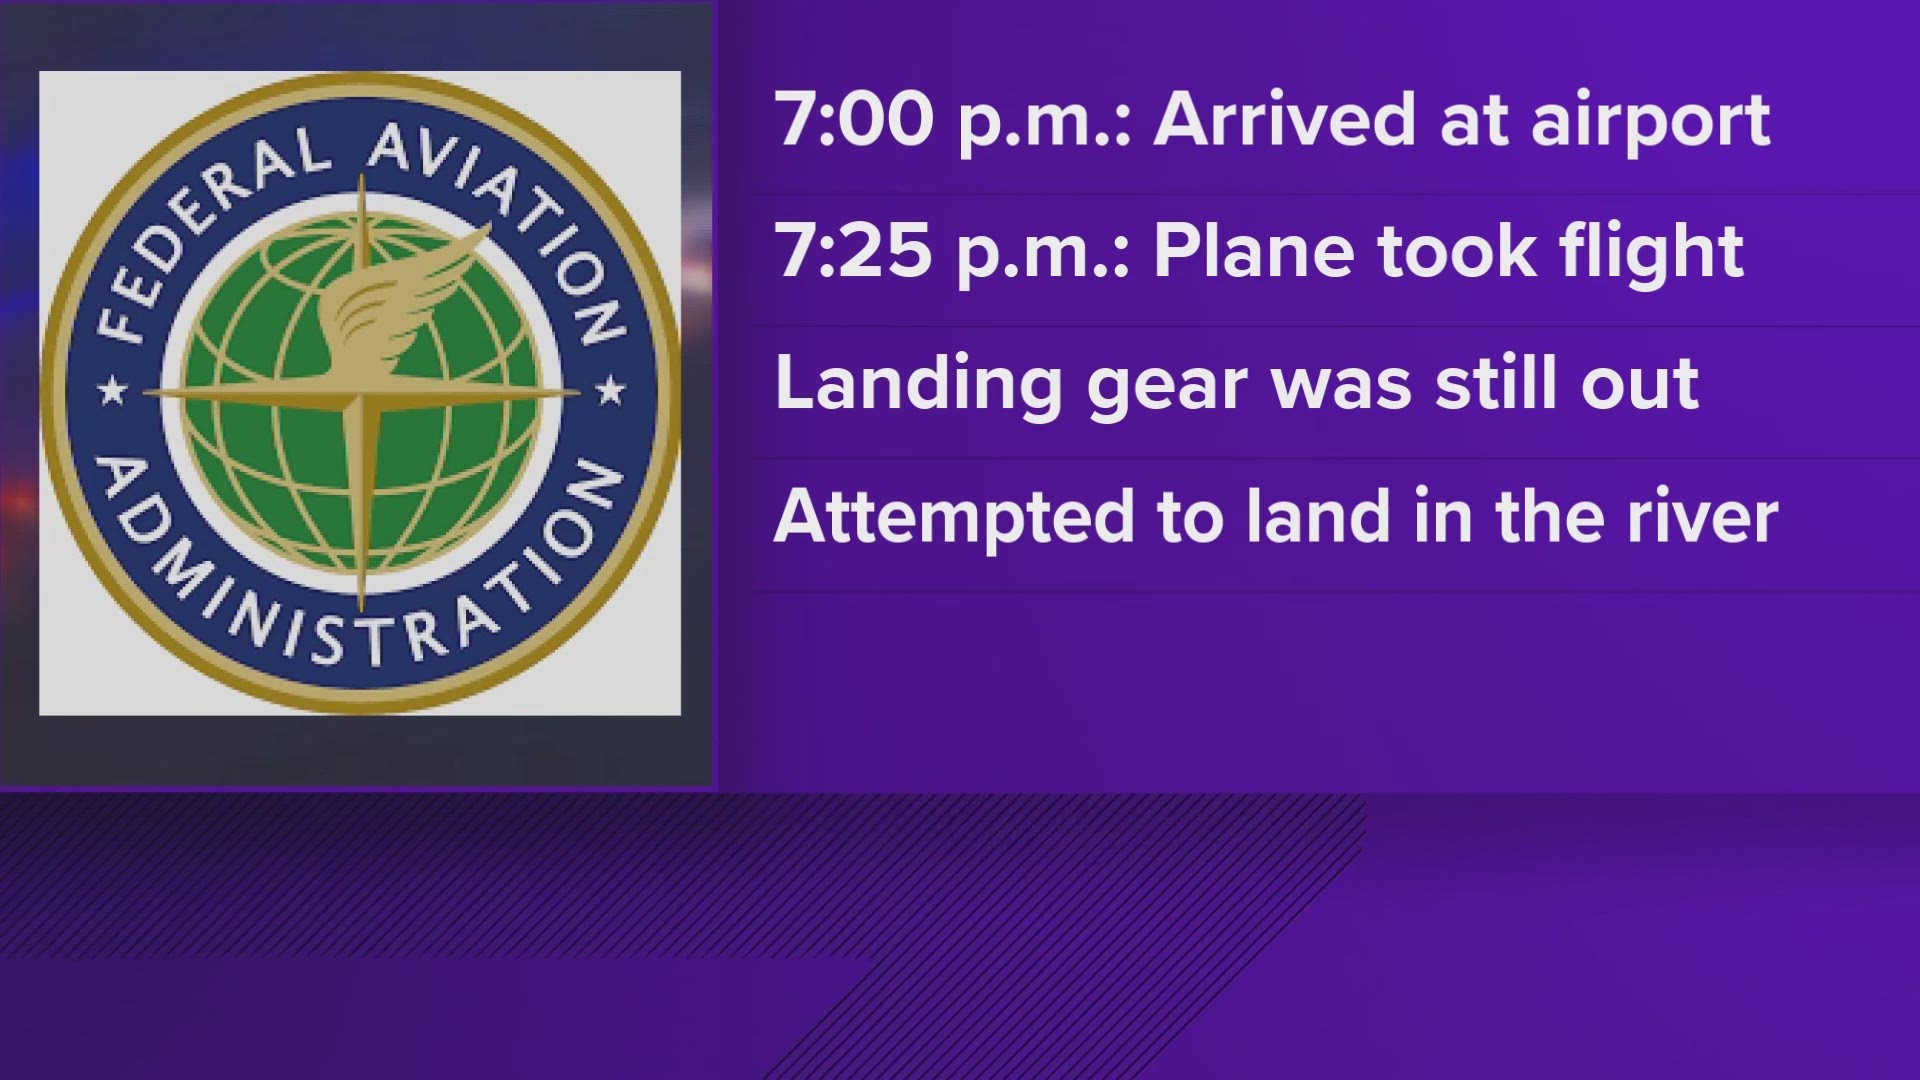 The pilot was able to escape the airplane without serious injuries, according to his statement.